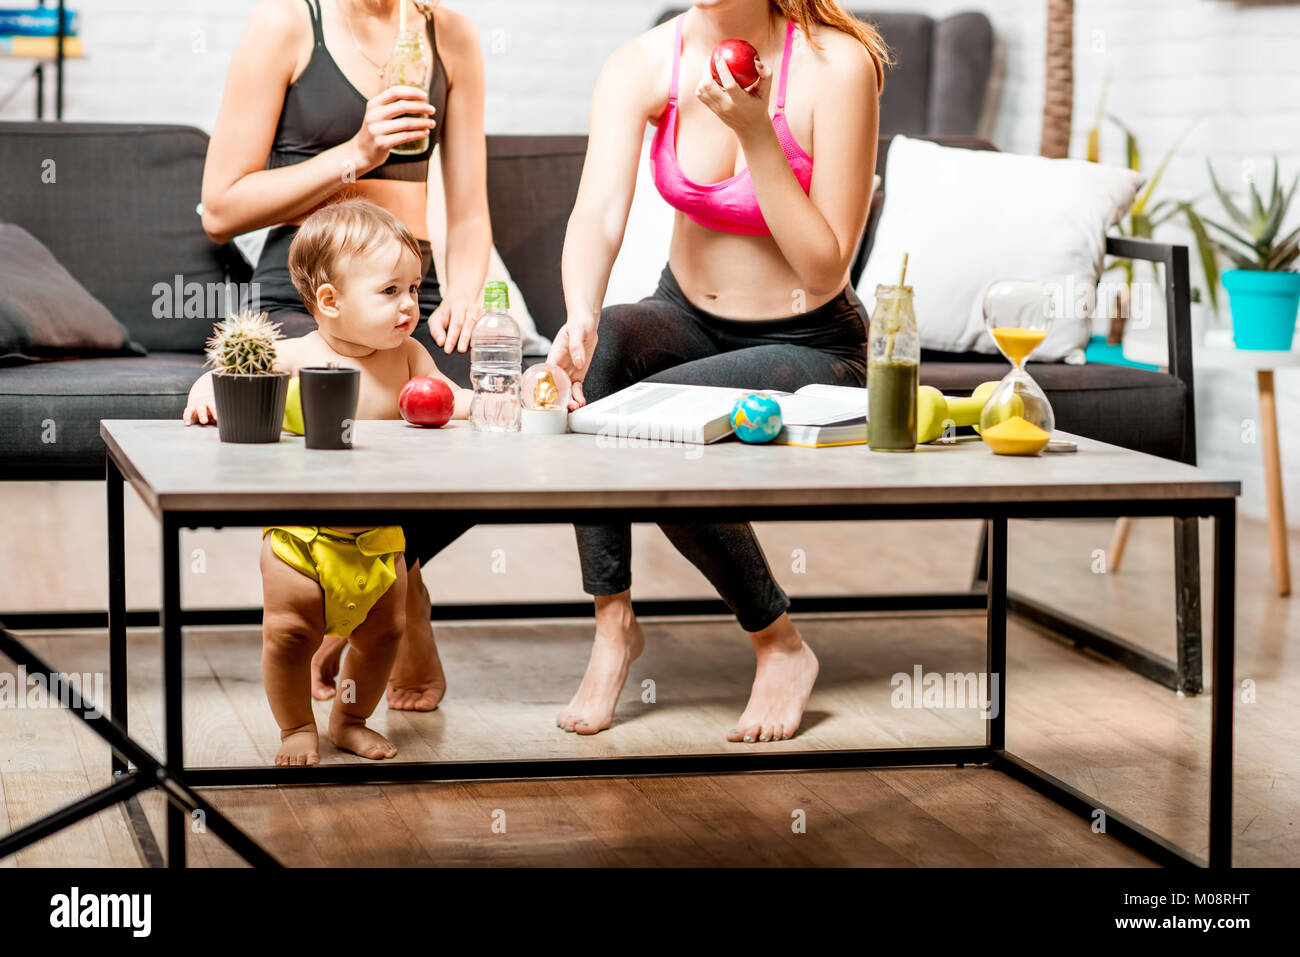 Sports women with baby boy at home Stock Photo